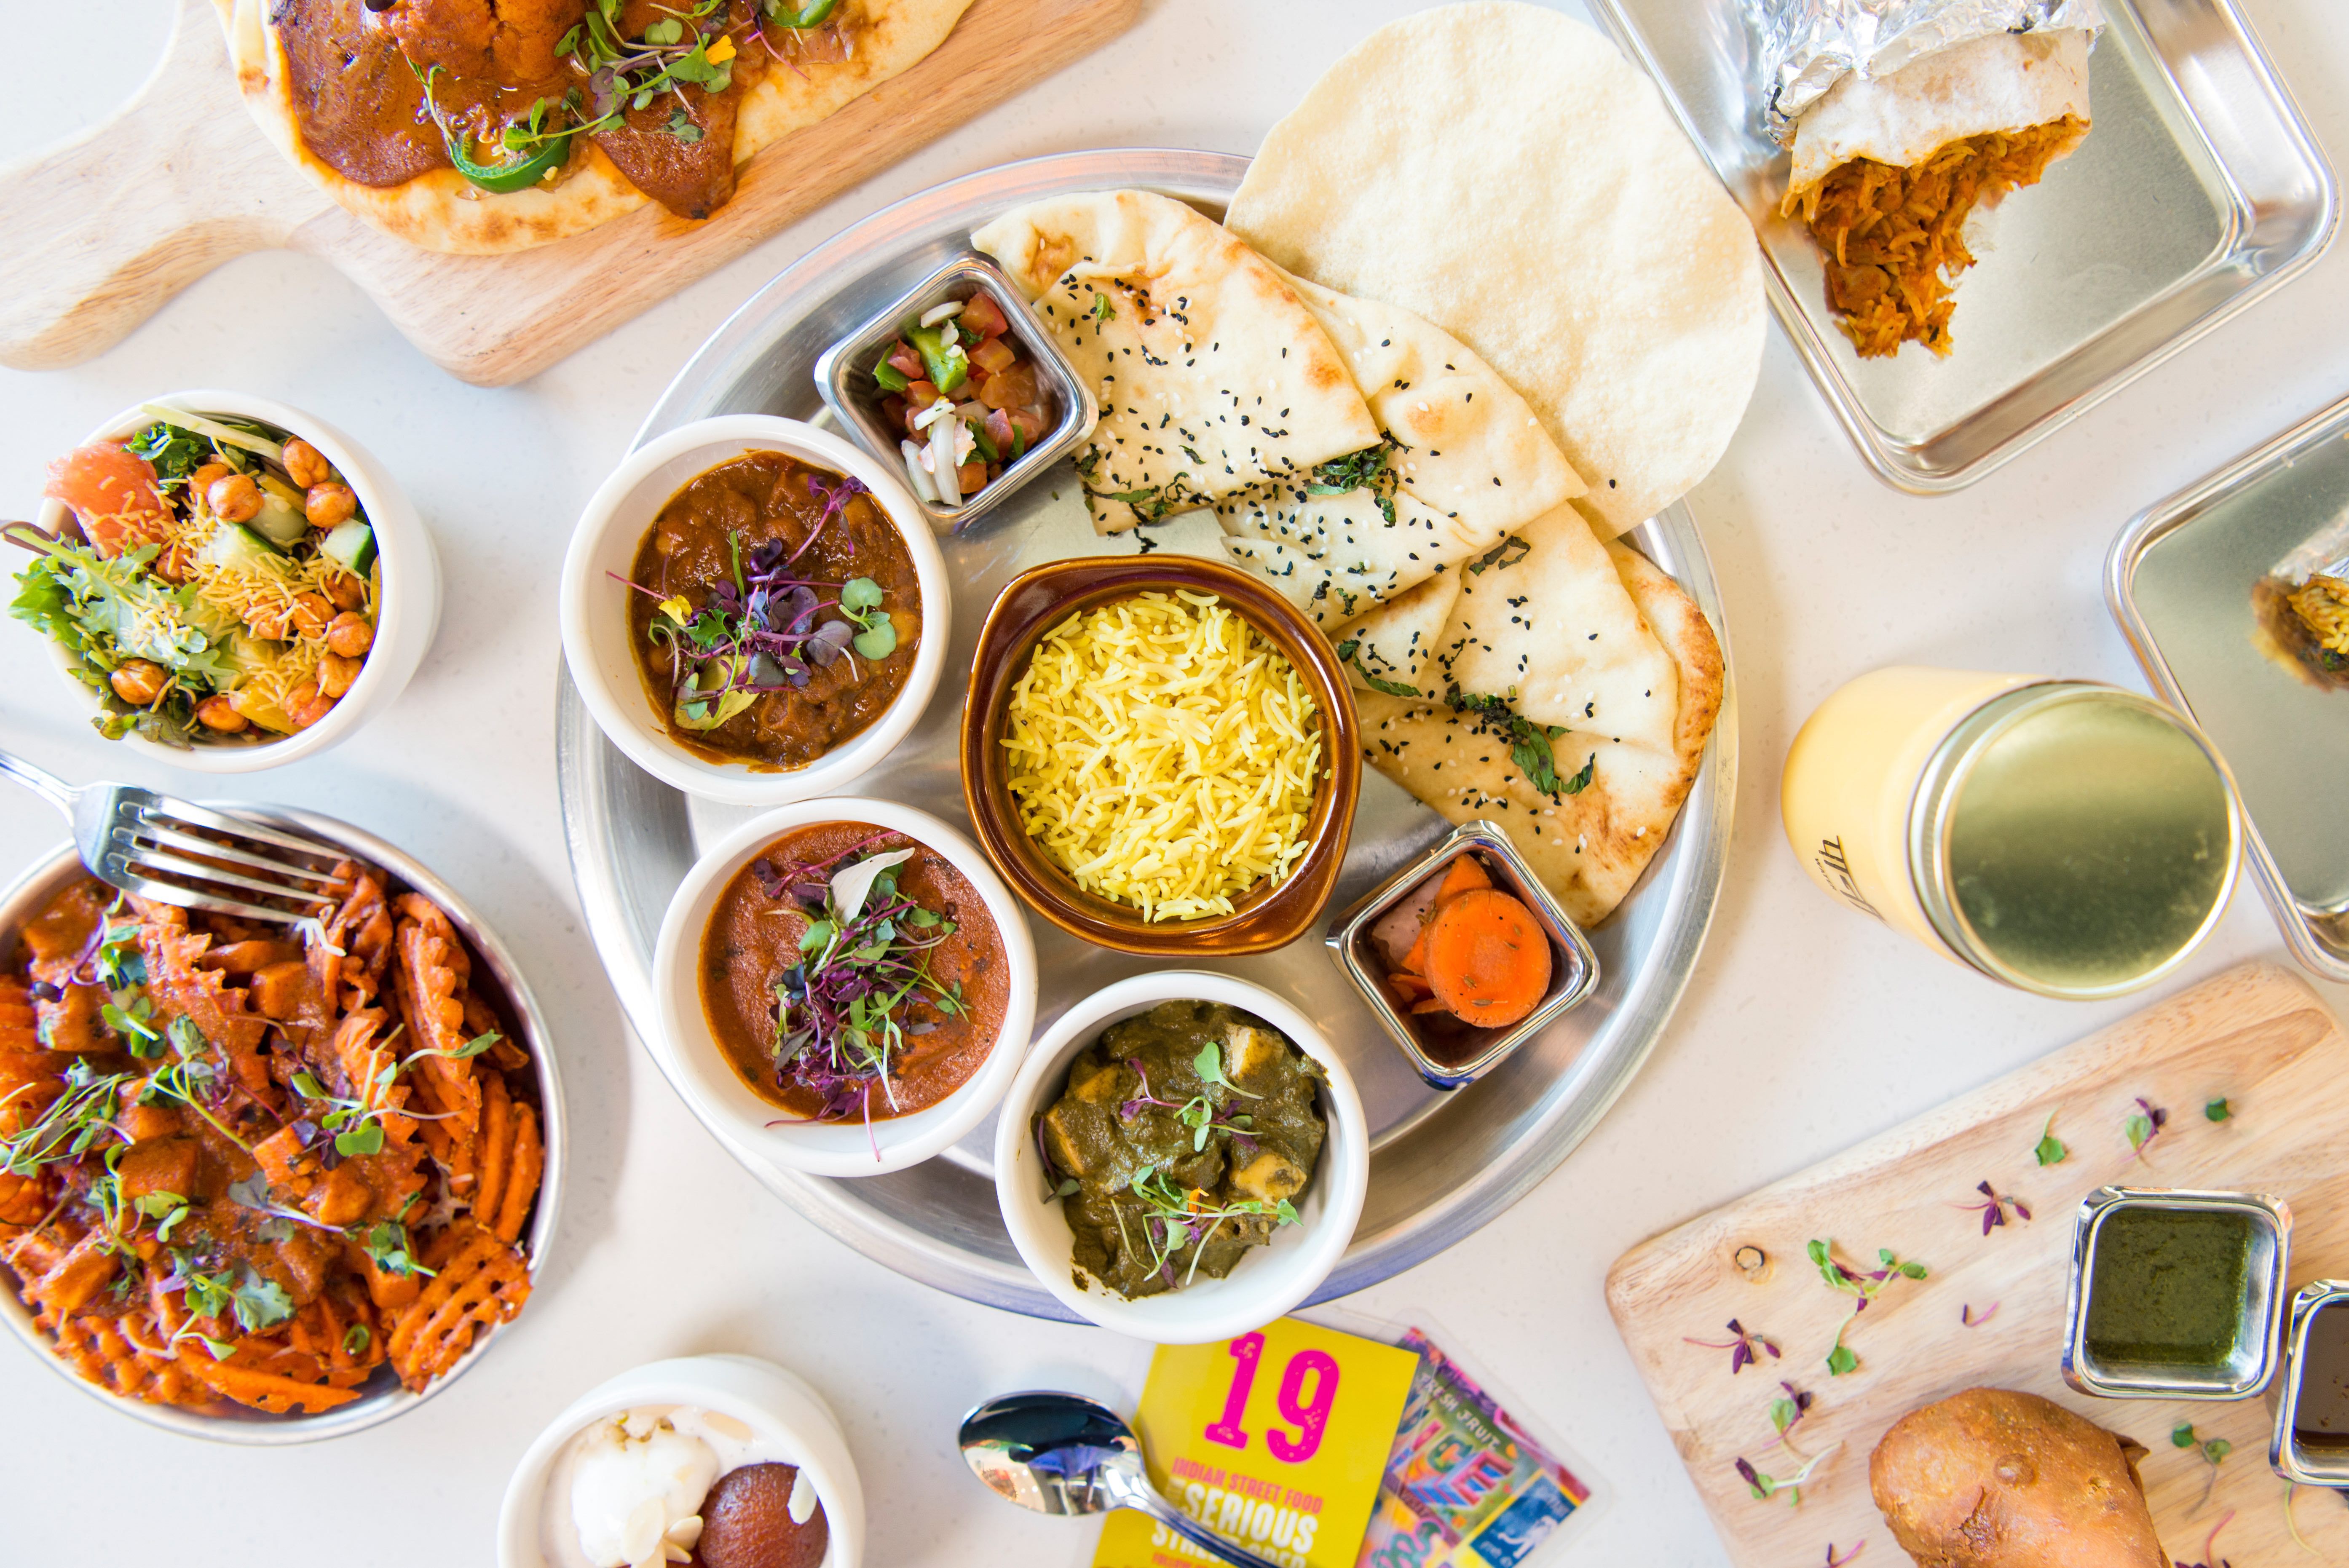 Indian Food Franchise Curry Up Now Moves Into North Texas - Indian Restaurant Near Me Open Now